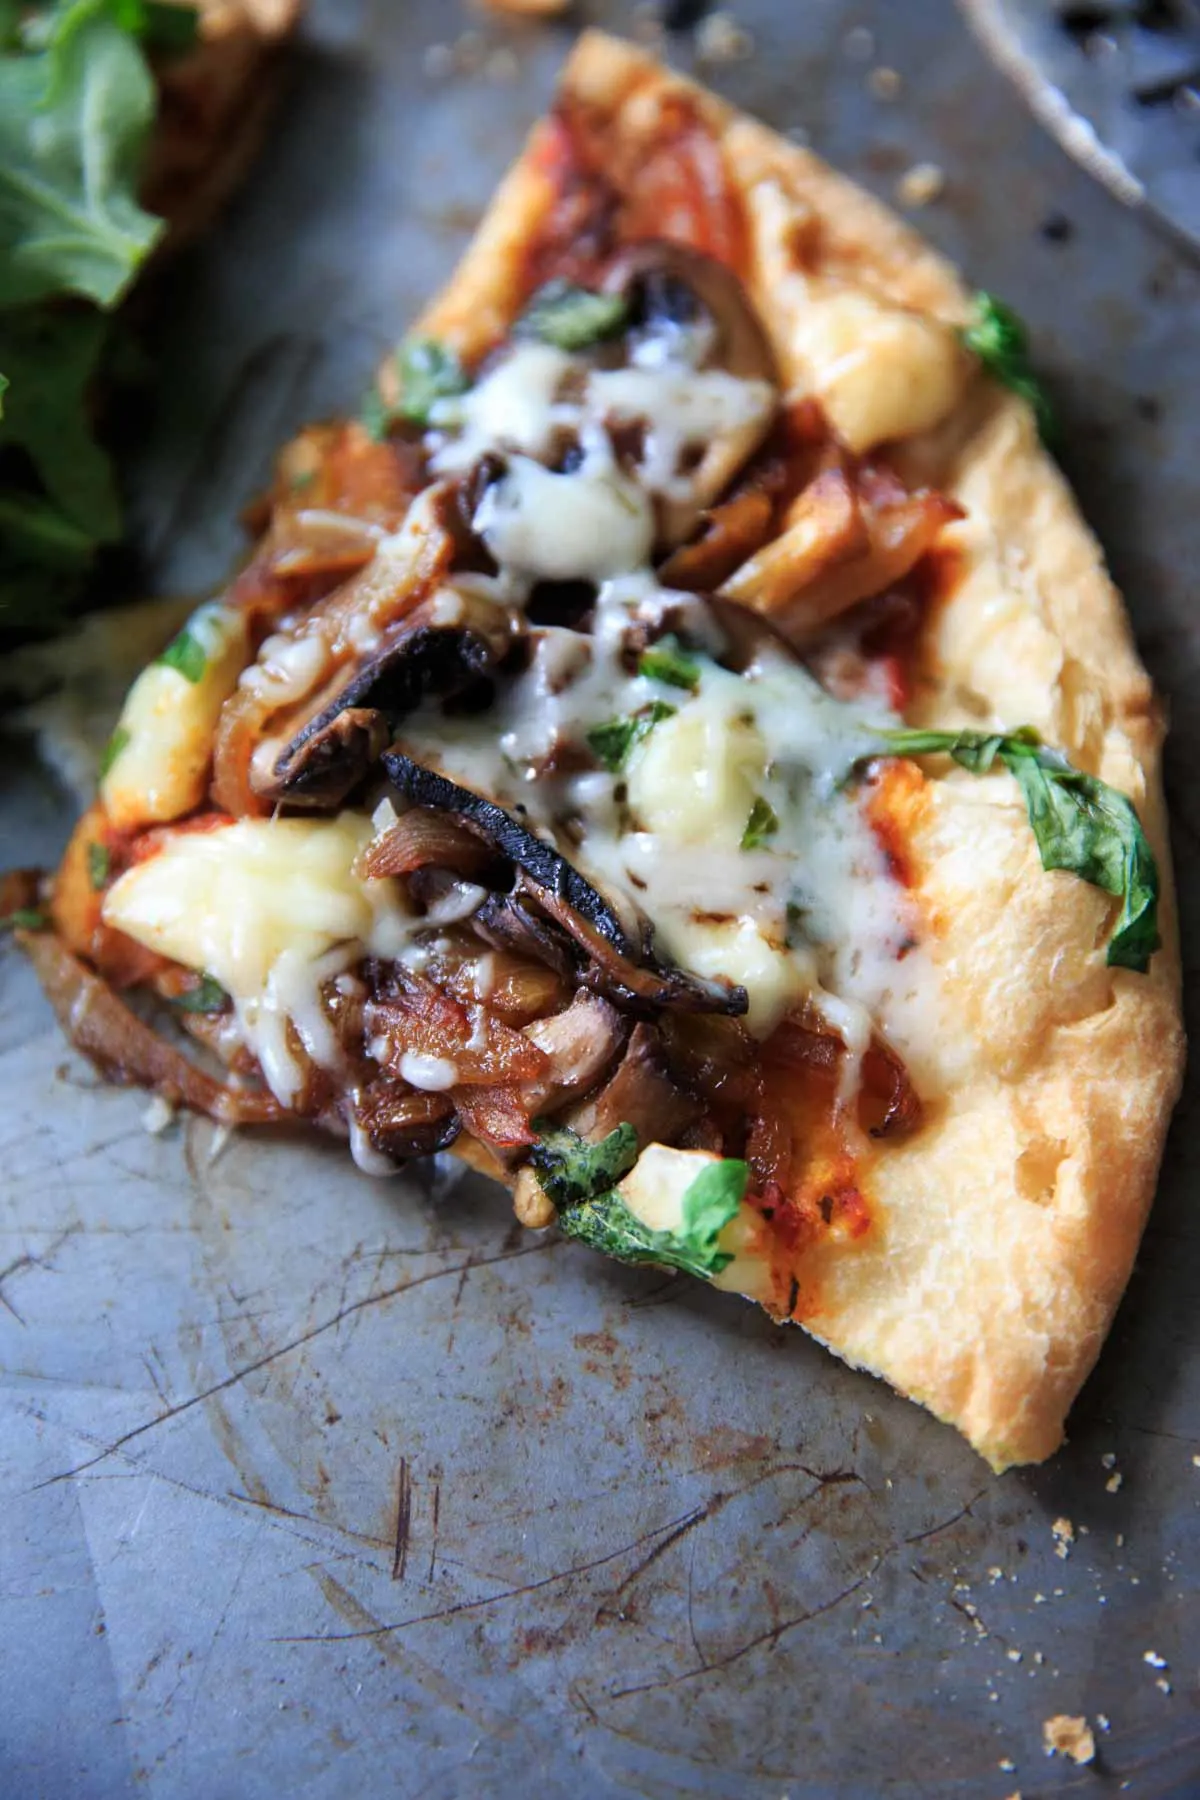 Close up of a pizza slice with caramelized onions, mushrooms and brie cheese before topping with arugula